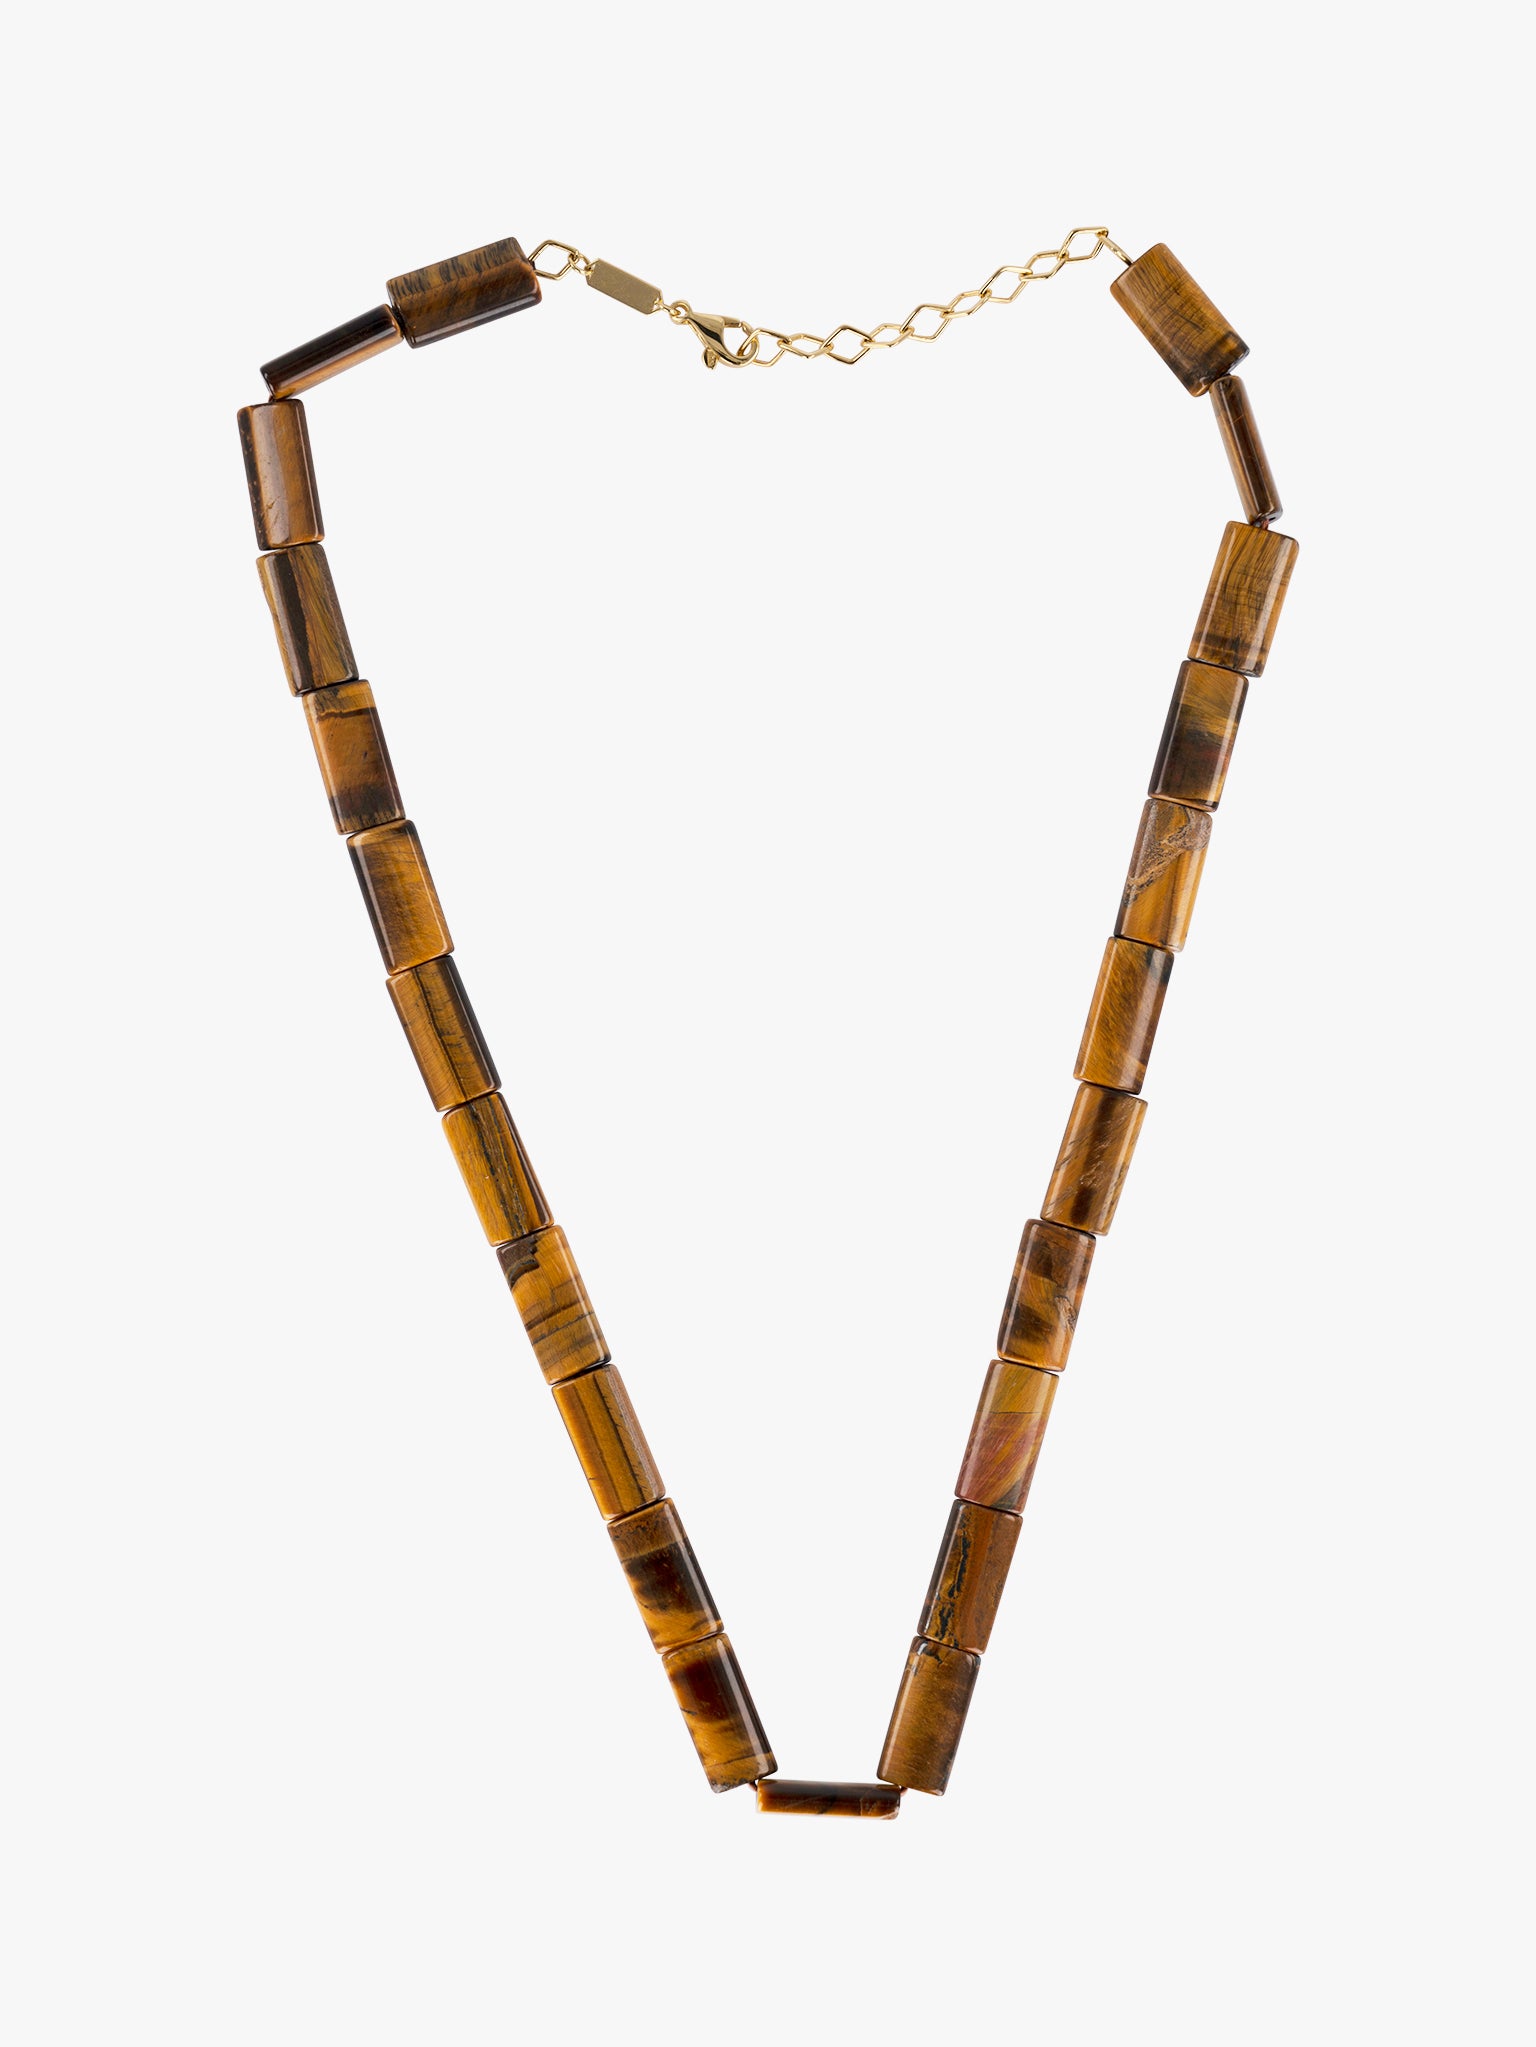 Tiger's eye bead necklace